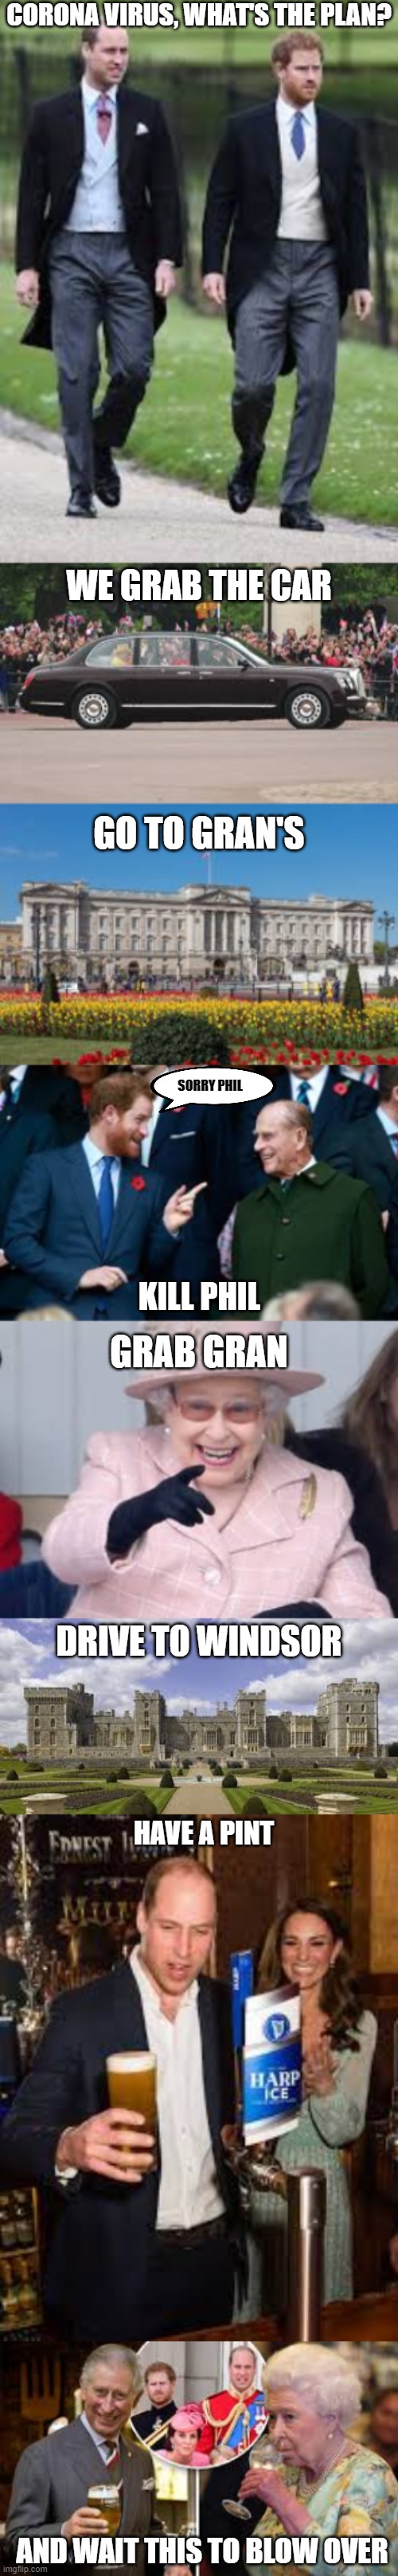 Royals of the Dead | CORONA VIRUS, WHAT'S THE PLAN? WE GRAB THE CAR; GO TO GRAN'S; SORRY PHIL; KILL PHIL; GRAB GRAN; DRIVE TO WINDSOR; HAVE A PINT; AND WAIT THIS TO BLOW OVER | image tagged in royals,fun,humor | made w/ Imgflip meme maker